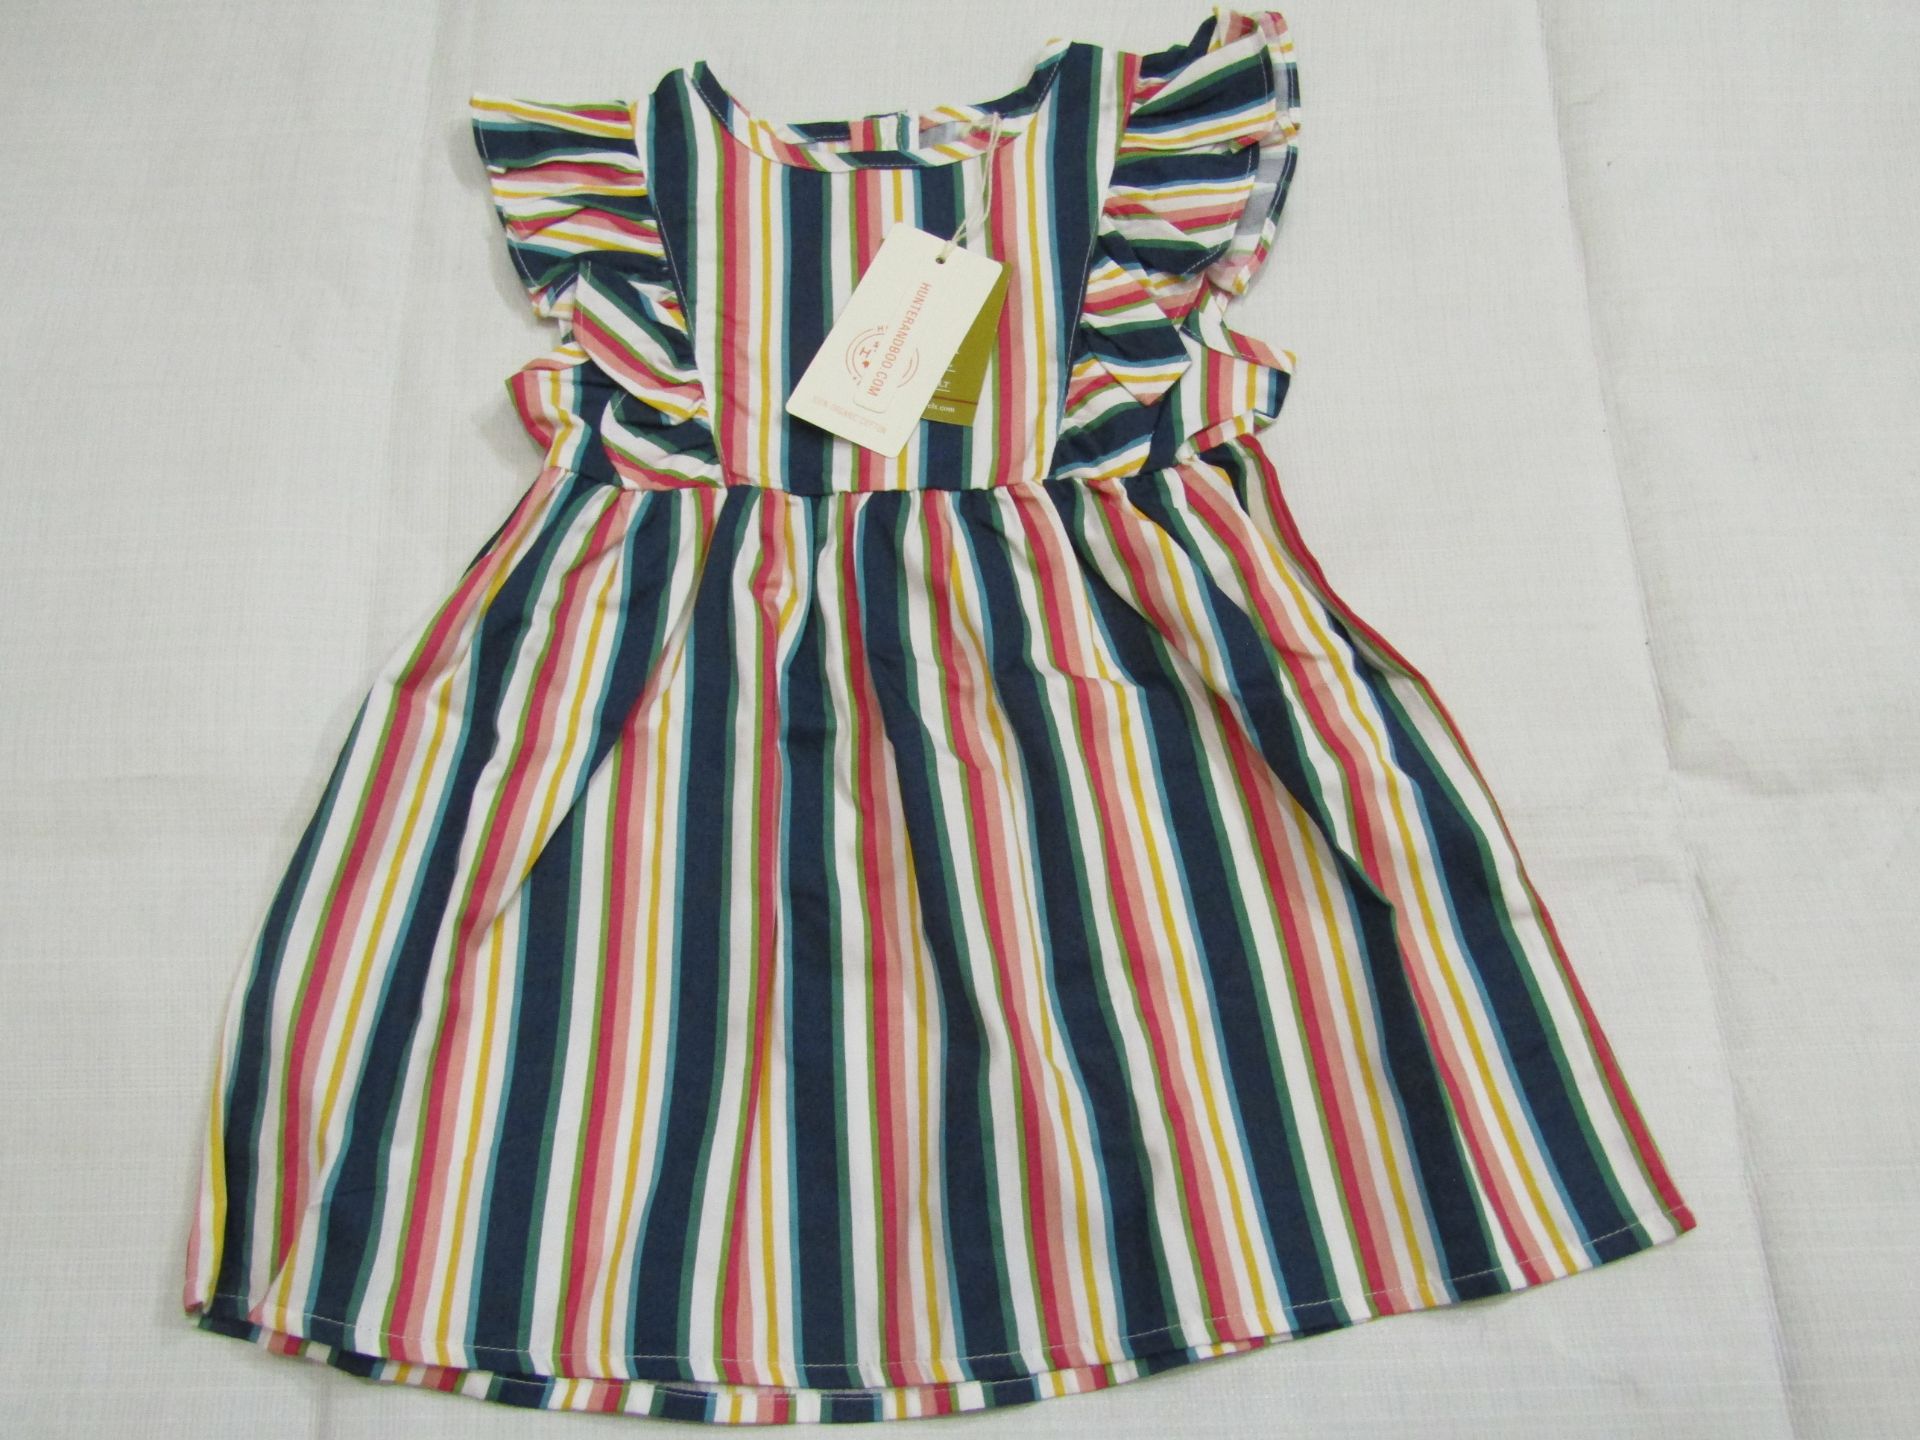 Hunter & Boo Helter Skelter Frilled Dress Aged 2-3 yrs New & Packaged RRP £29